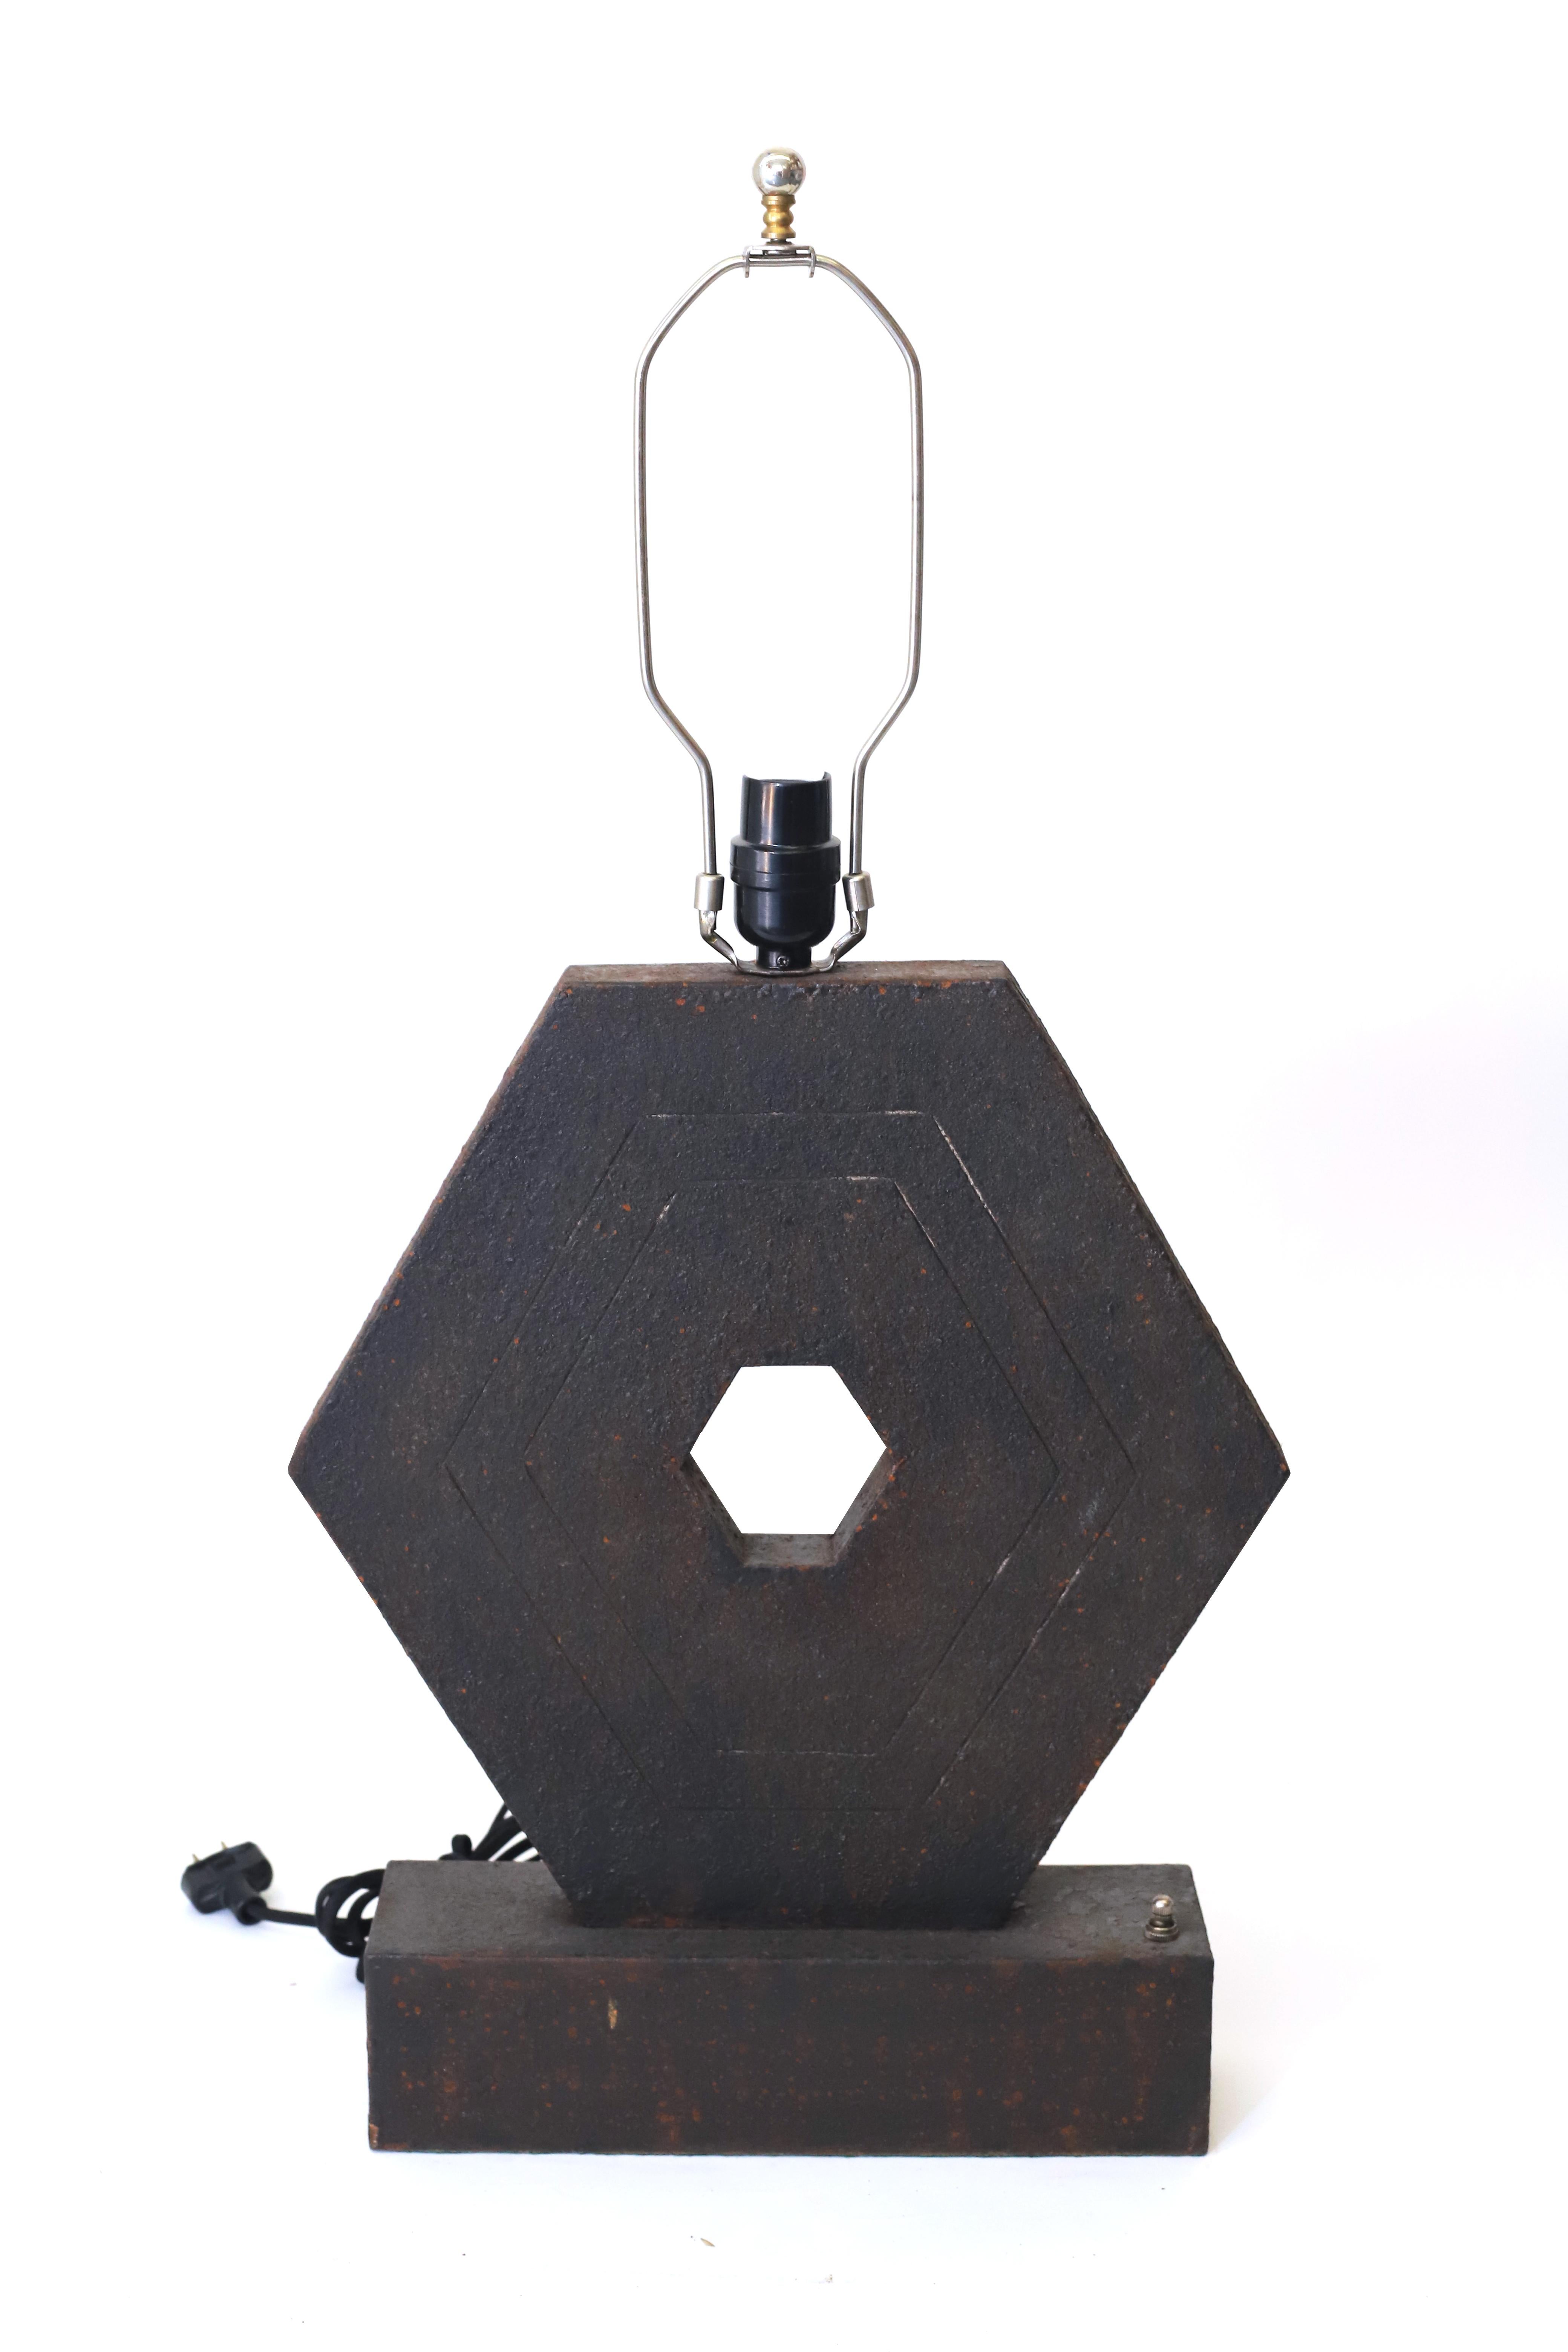 Custom made hexagonal oxidized metal table lamp designed by Juan Montoya. This geometric piece will add a unique look to any room. 

Property from esteemed interior designer Juan Montoya. Juan Montoya is one of the most acclaimed and prolific